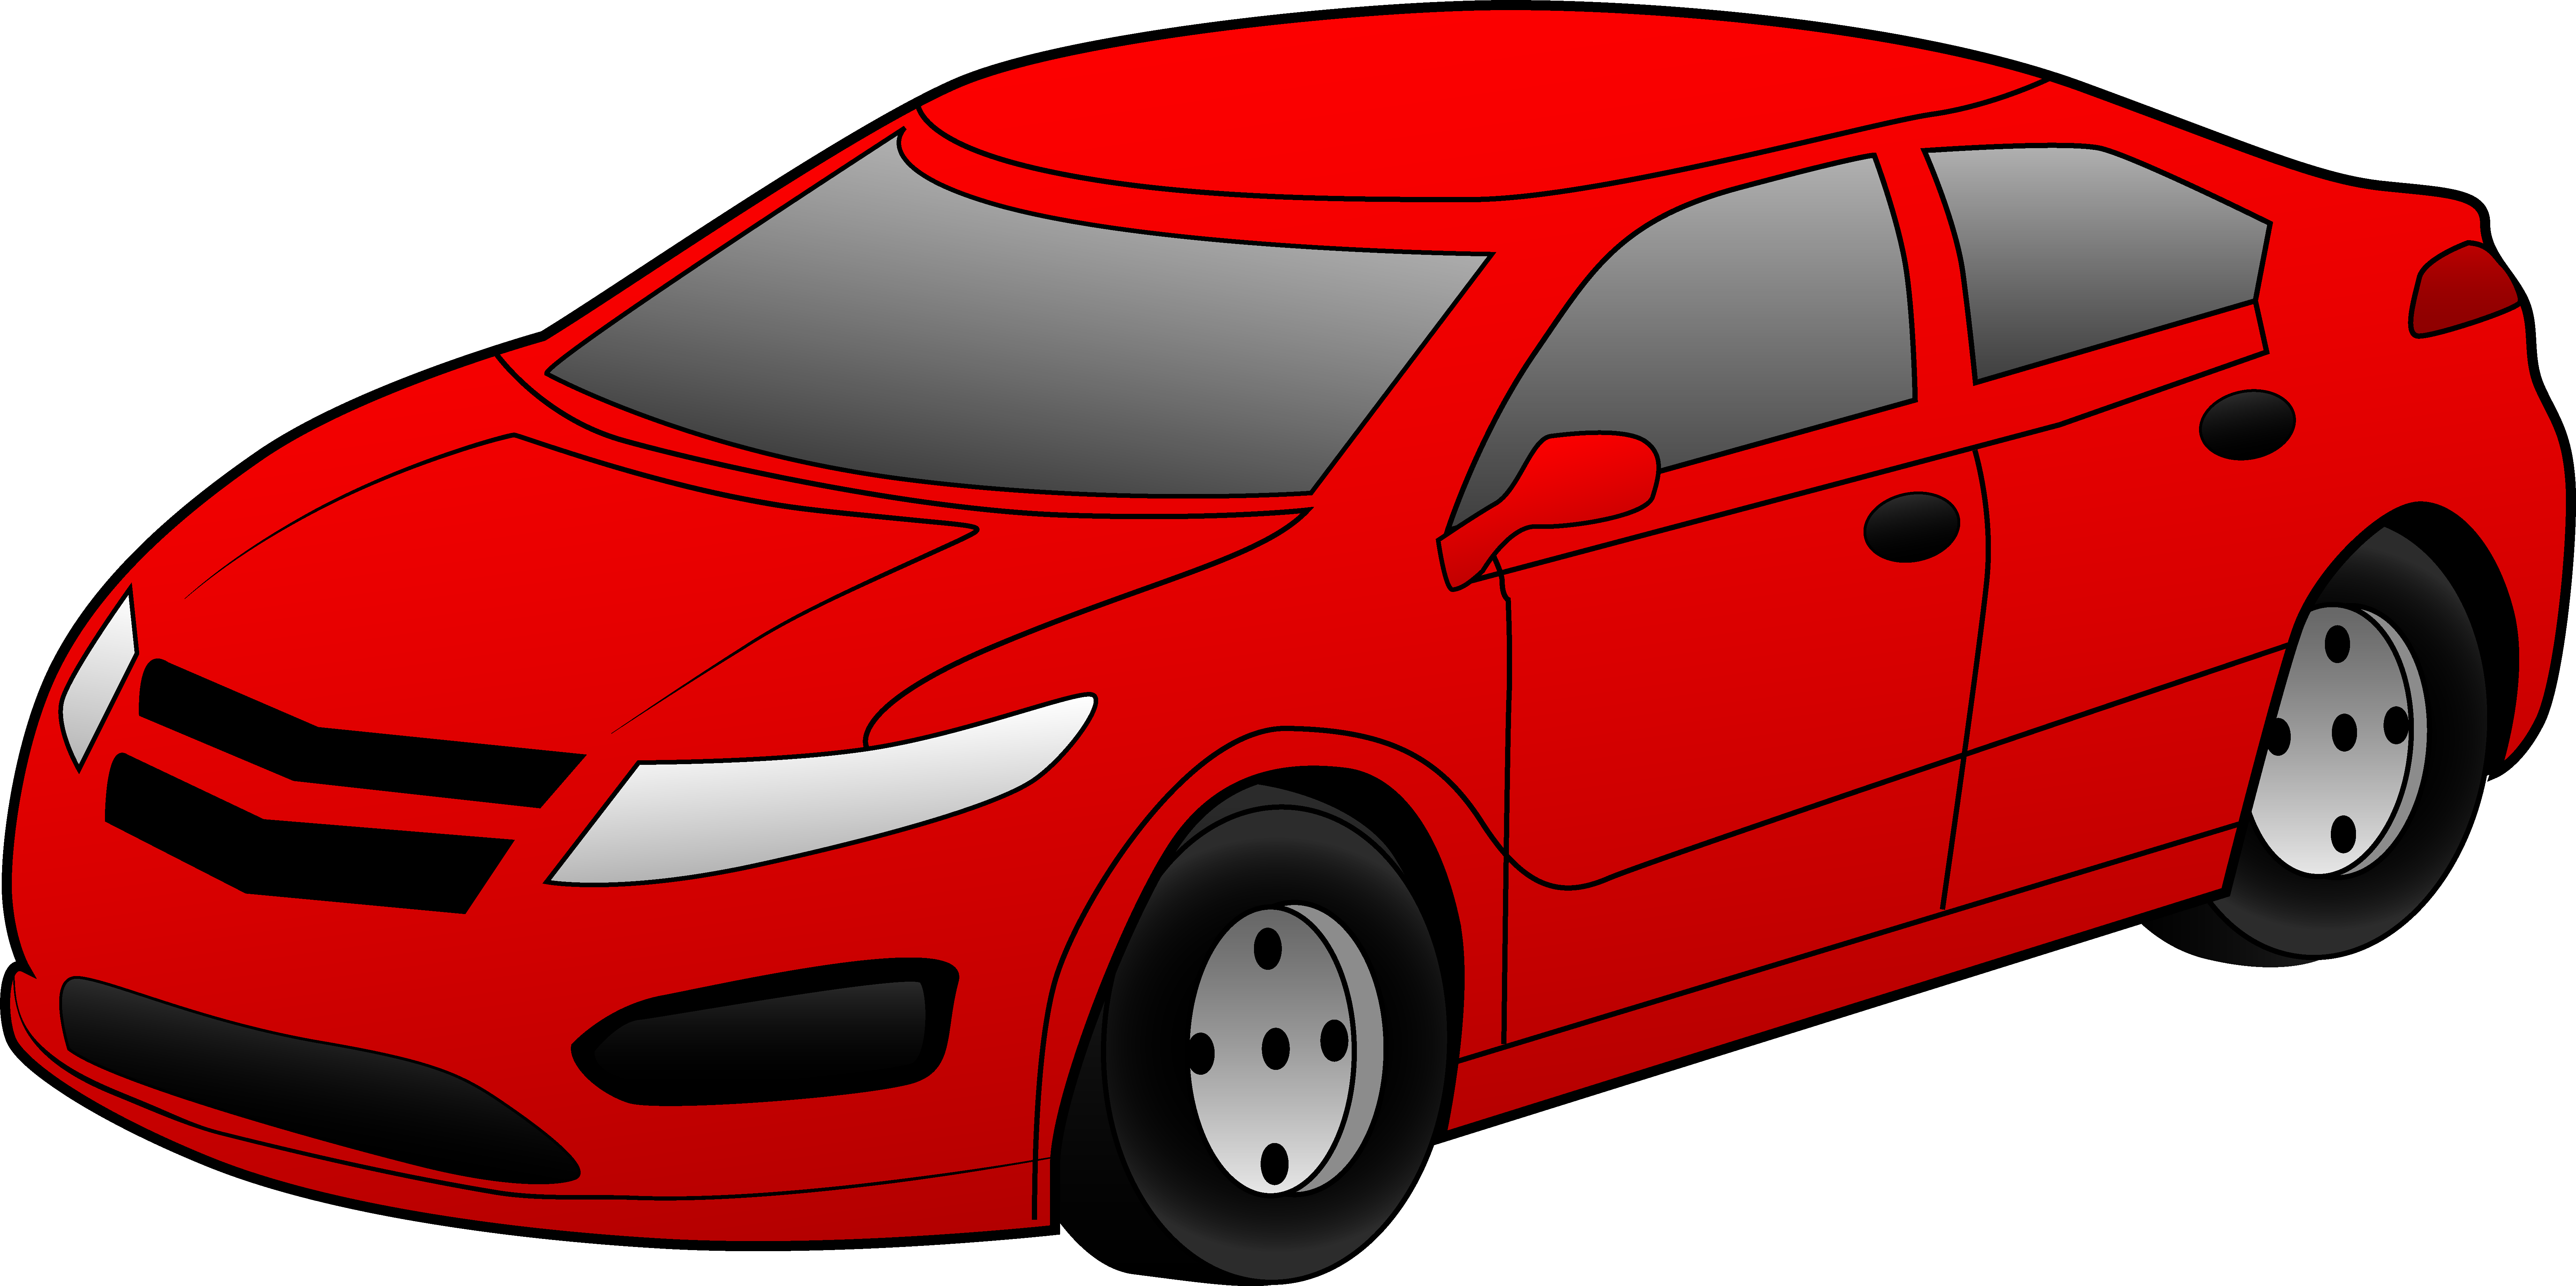 Clipart toy car.